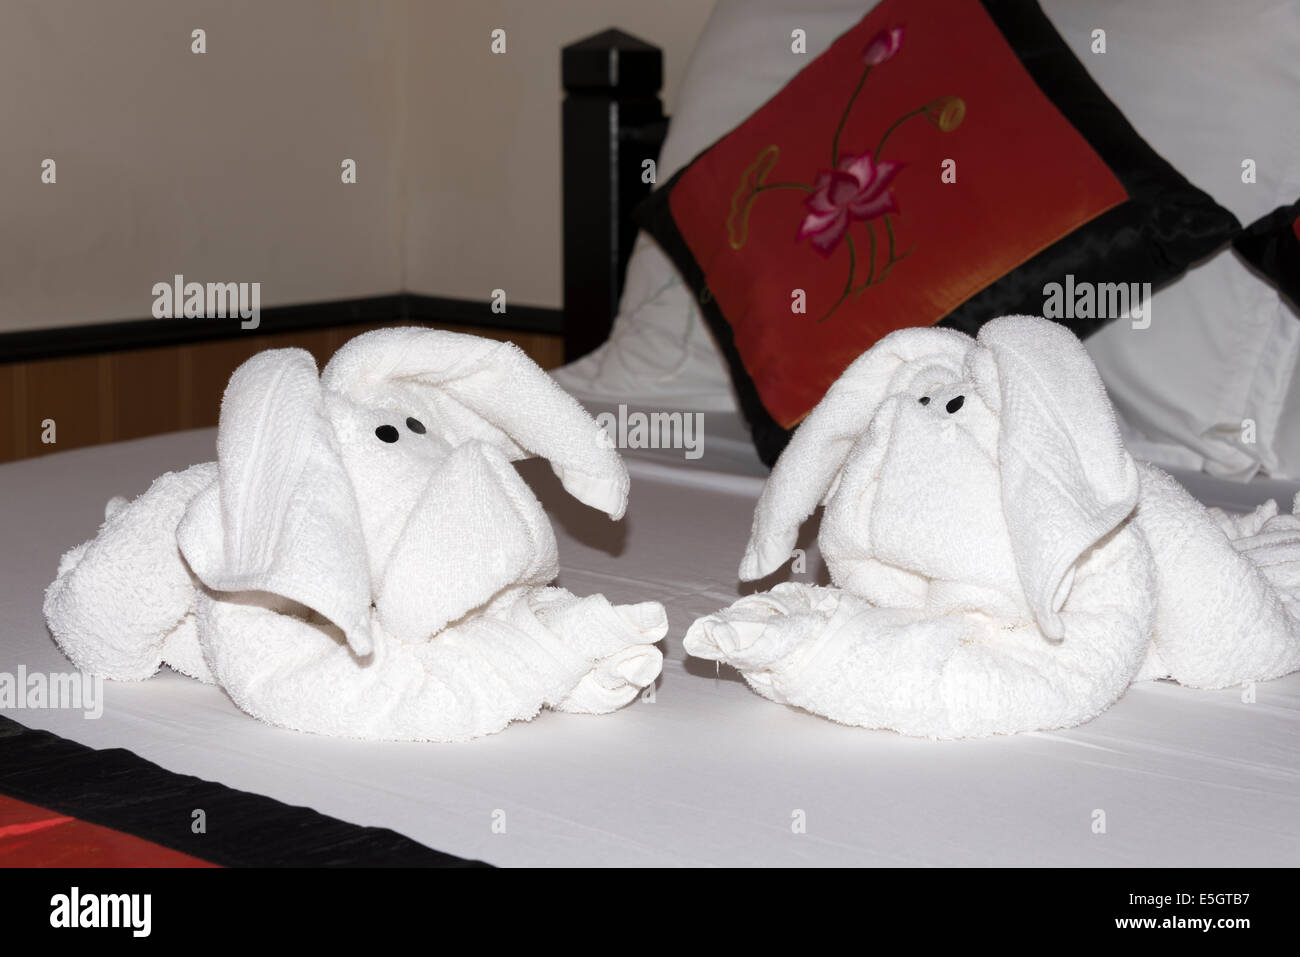 Towel origami in a hotel in the Socialist Republic of Vietnam. Stock Photo